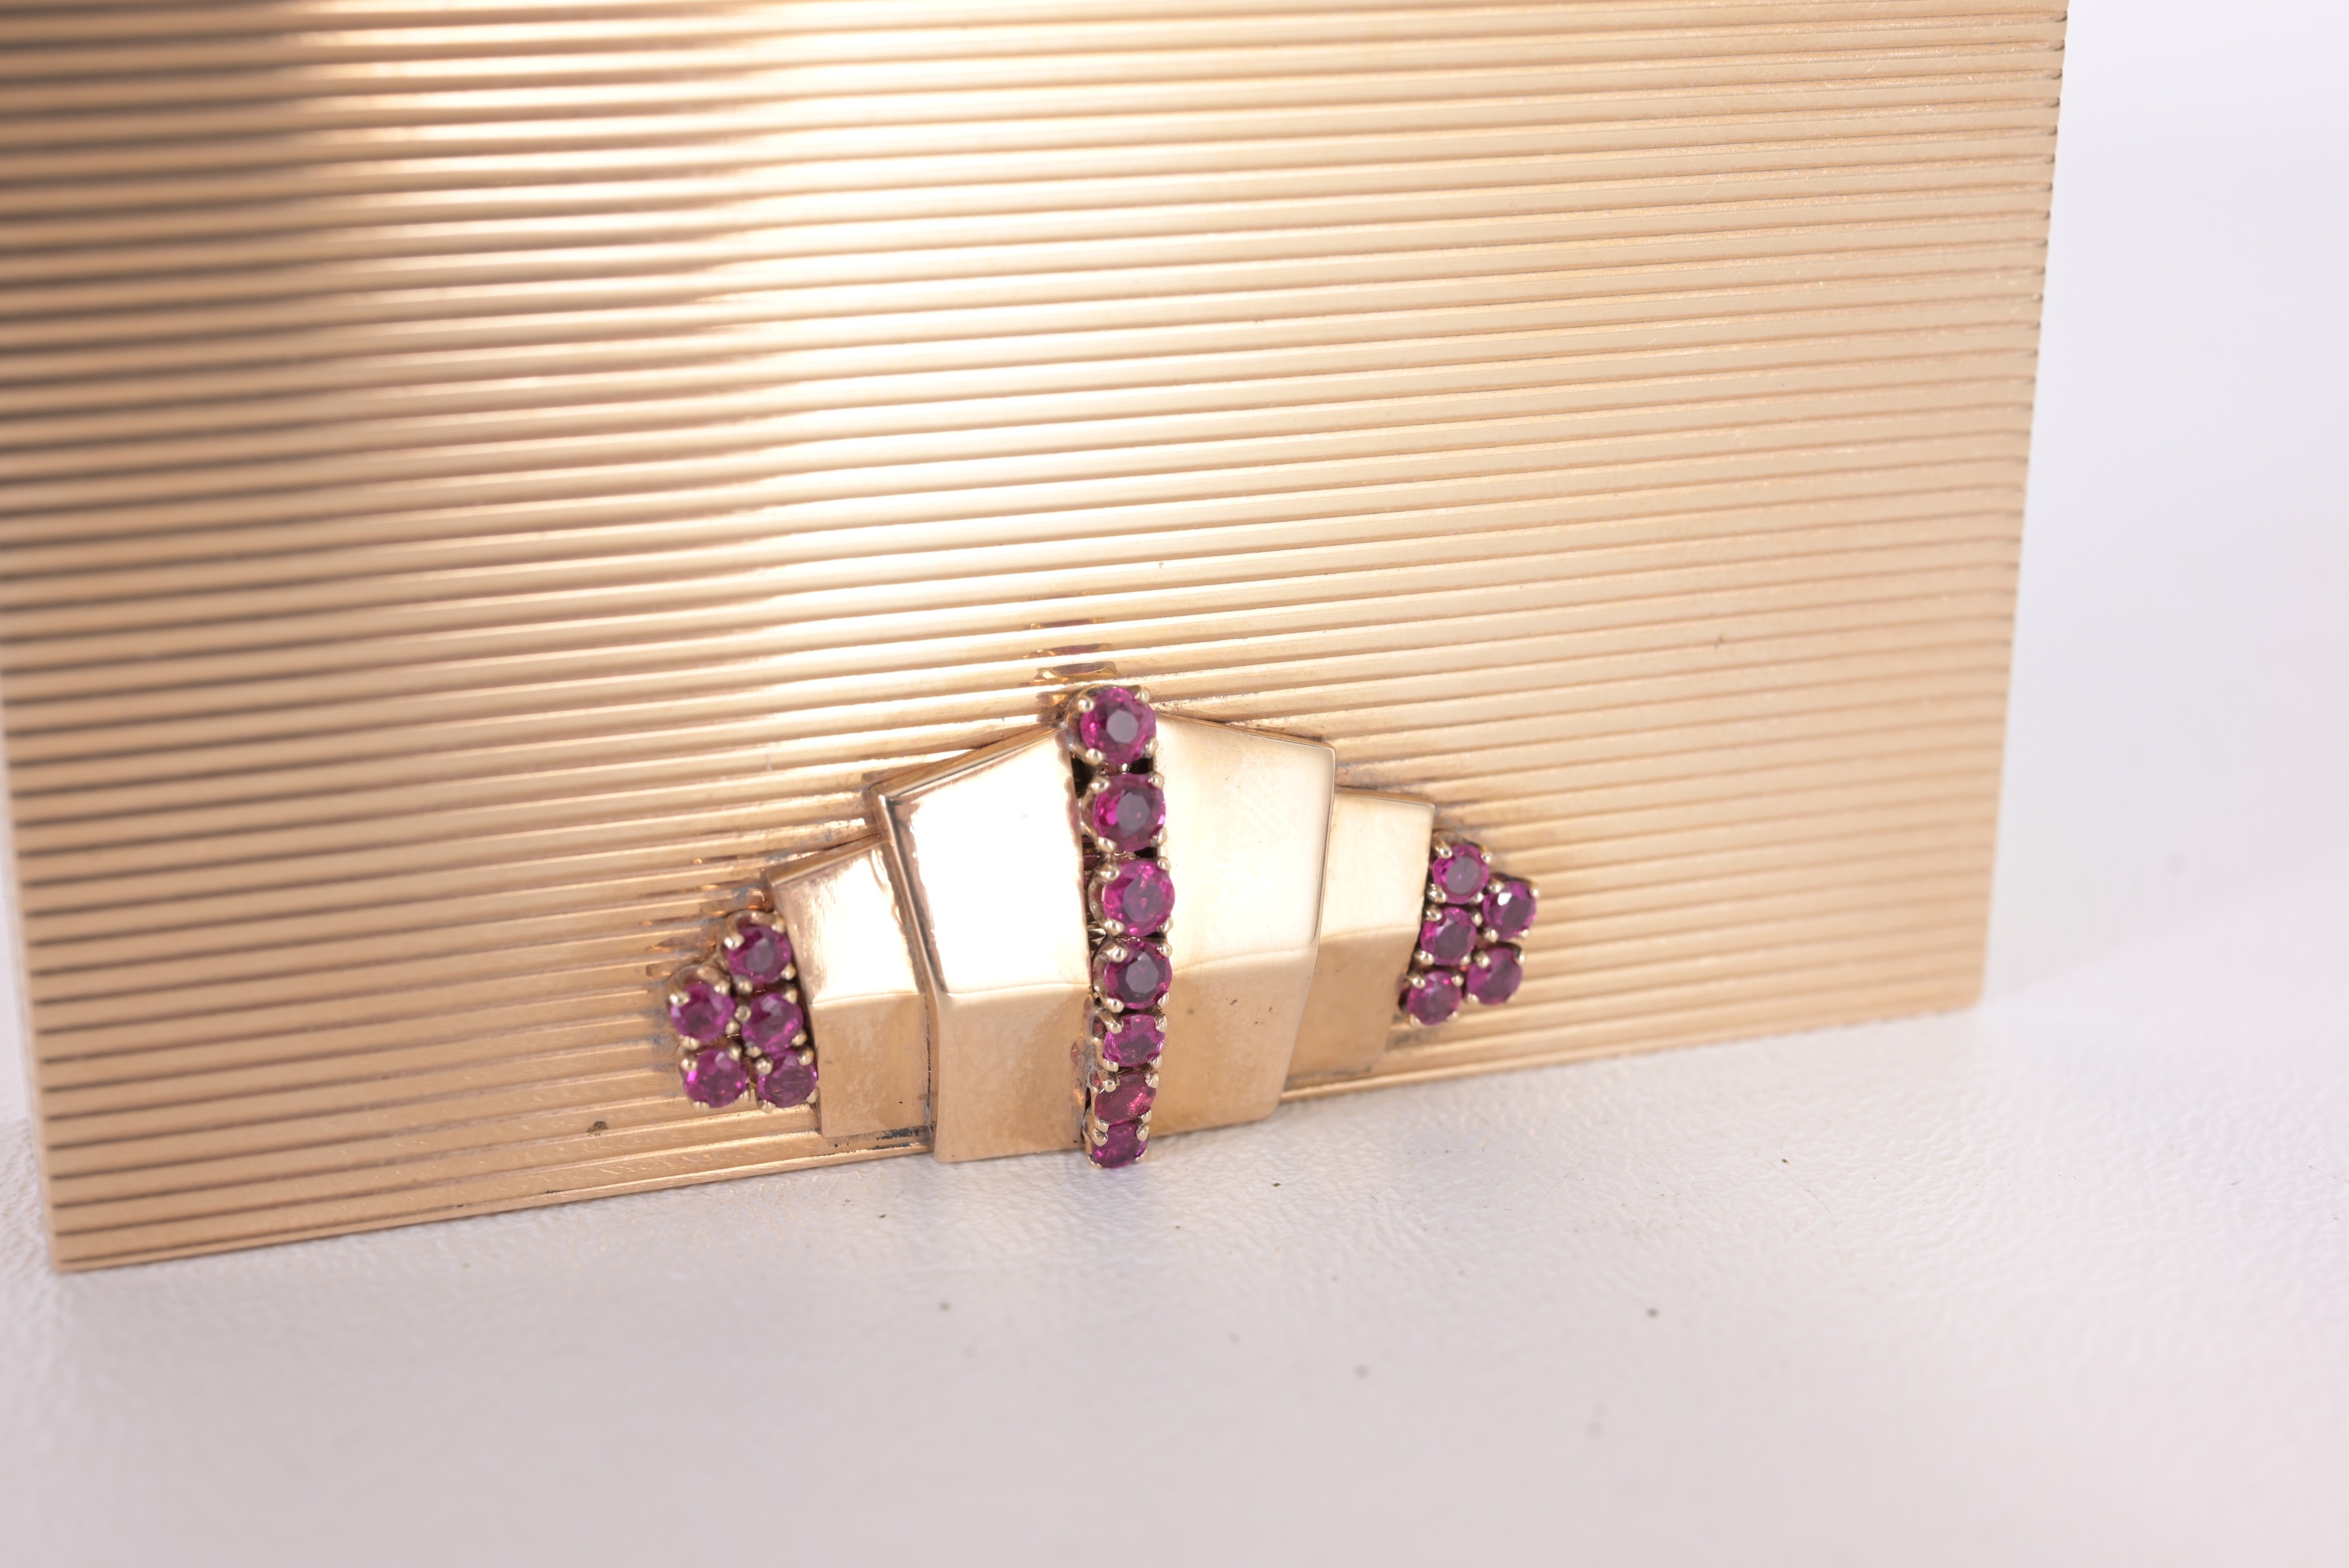 Cartier 14K Gold & Ruby Compact Case - Image 4 of 7